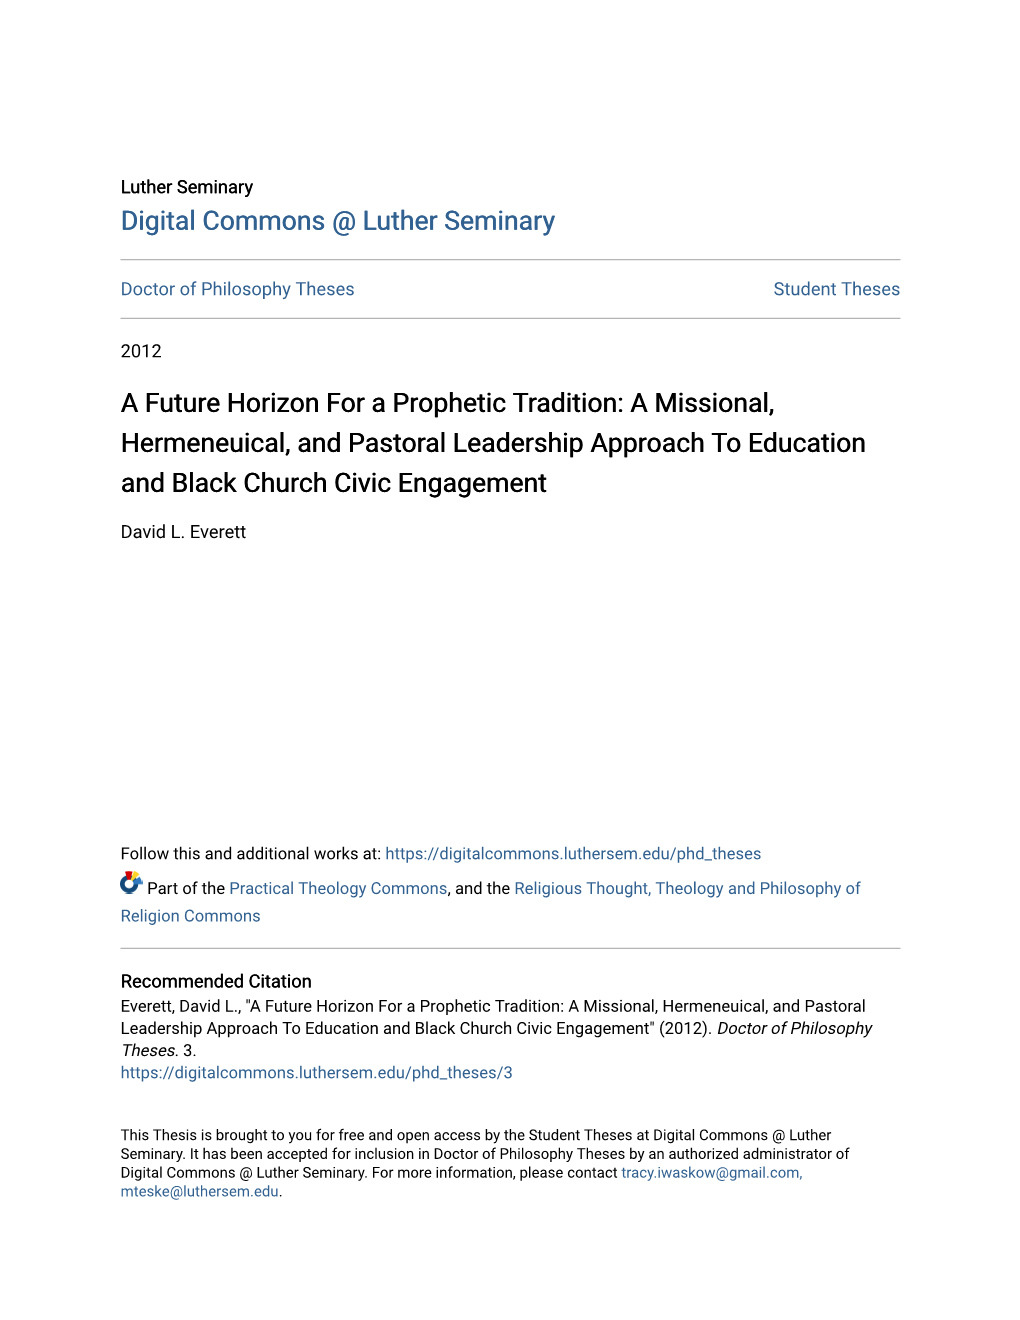 A Future Horizon for a Prophetic Tradition: a Missional, Hermeneuical, and Pastoral Leadership Approach to Education and Black Church Civic Engagement